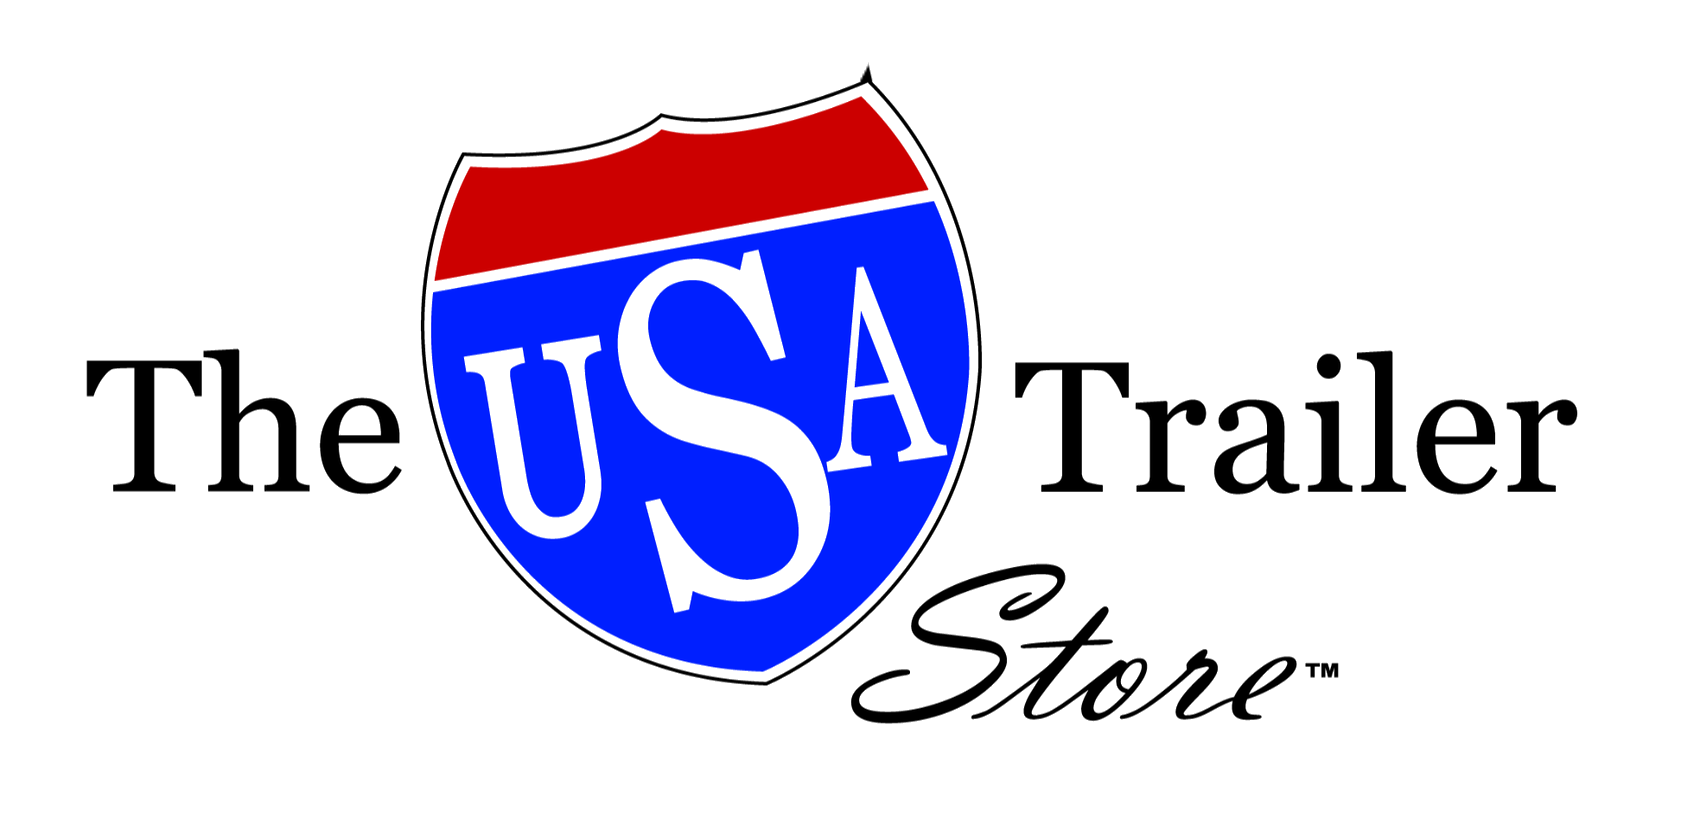 The USA Trailer Store